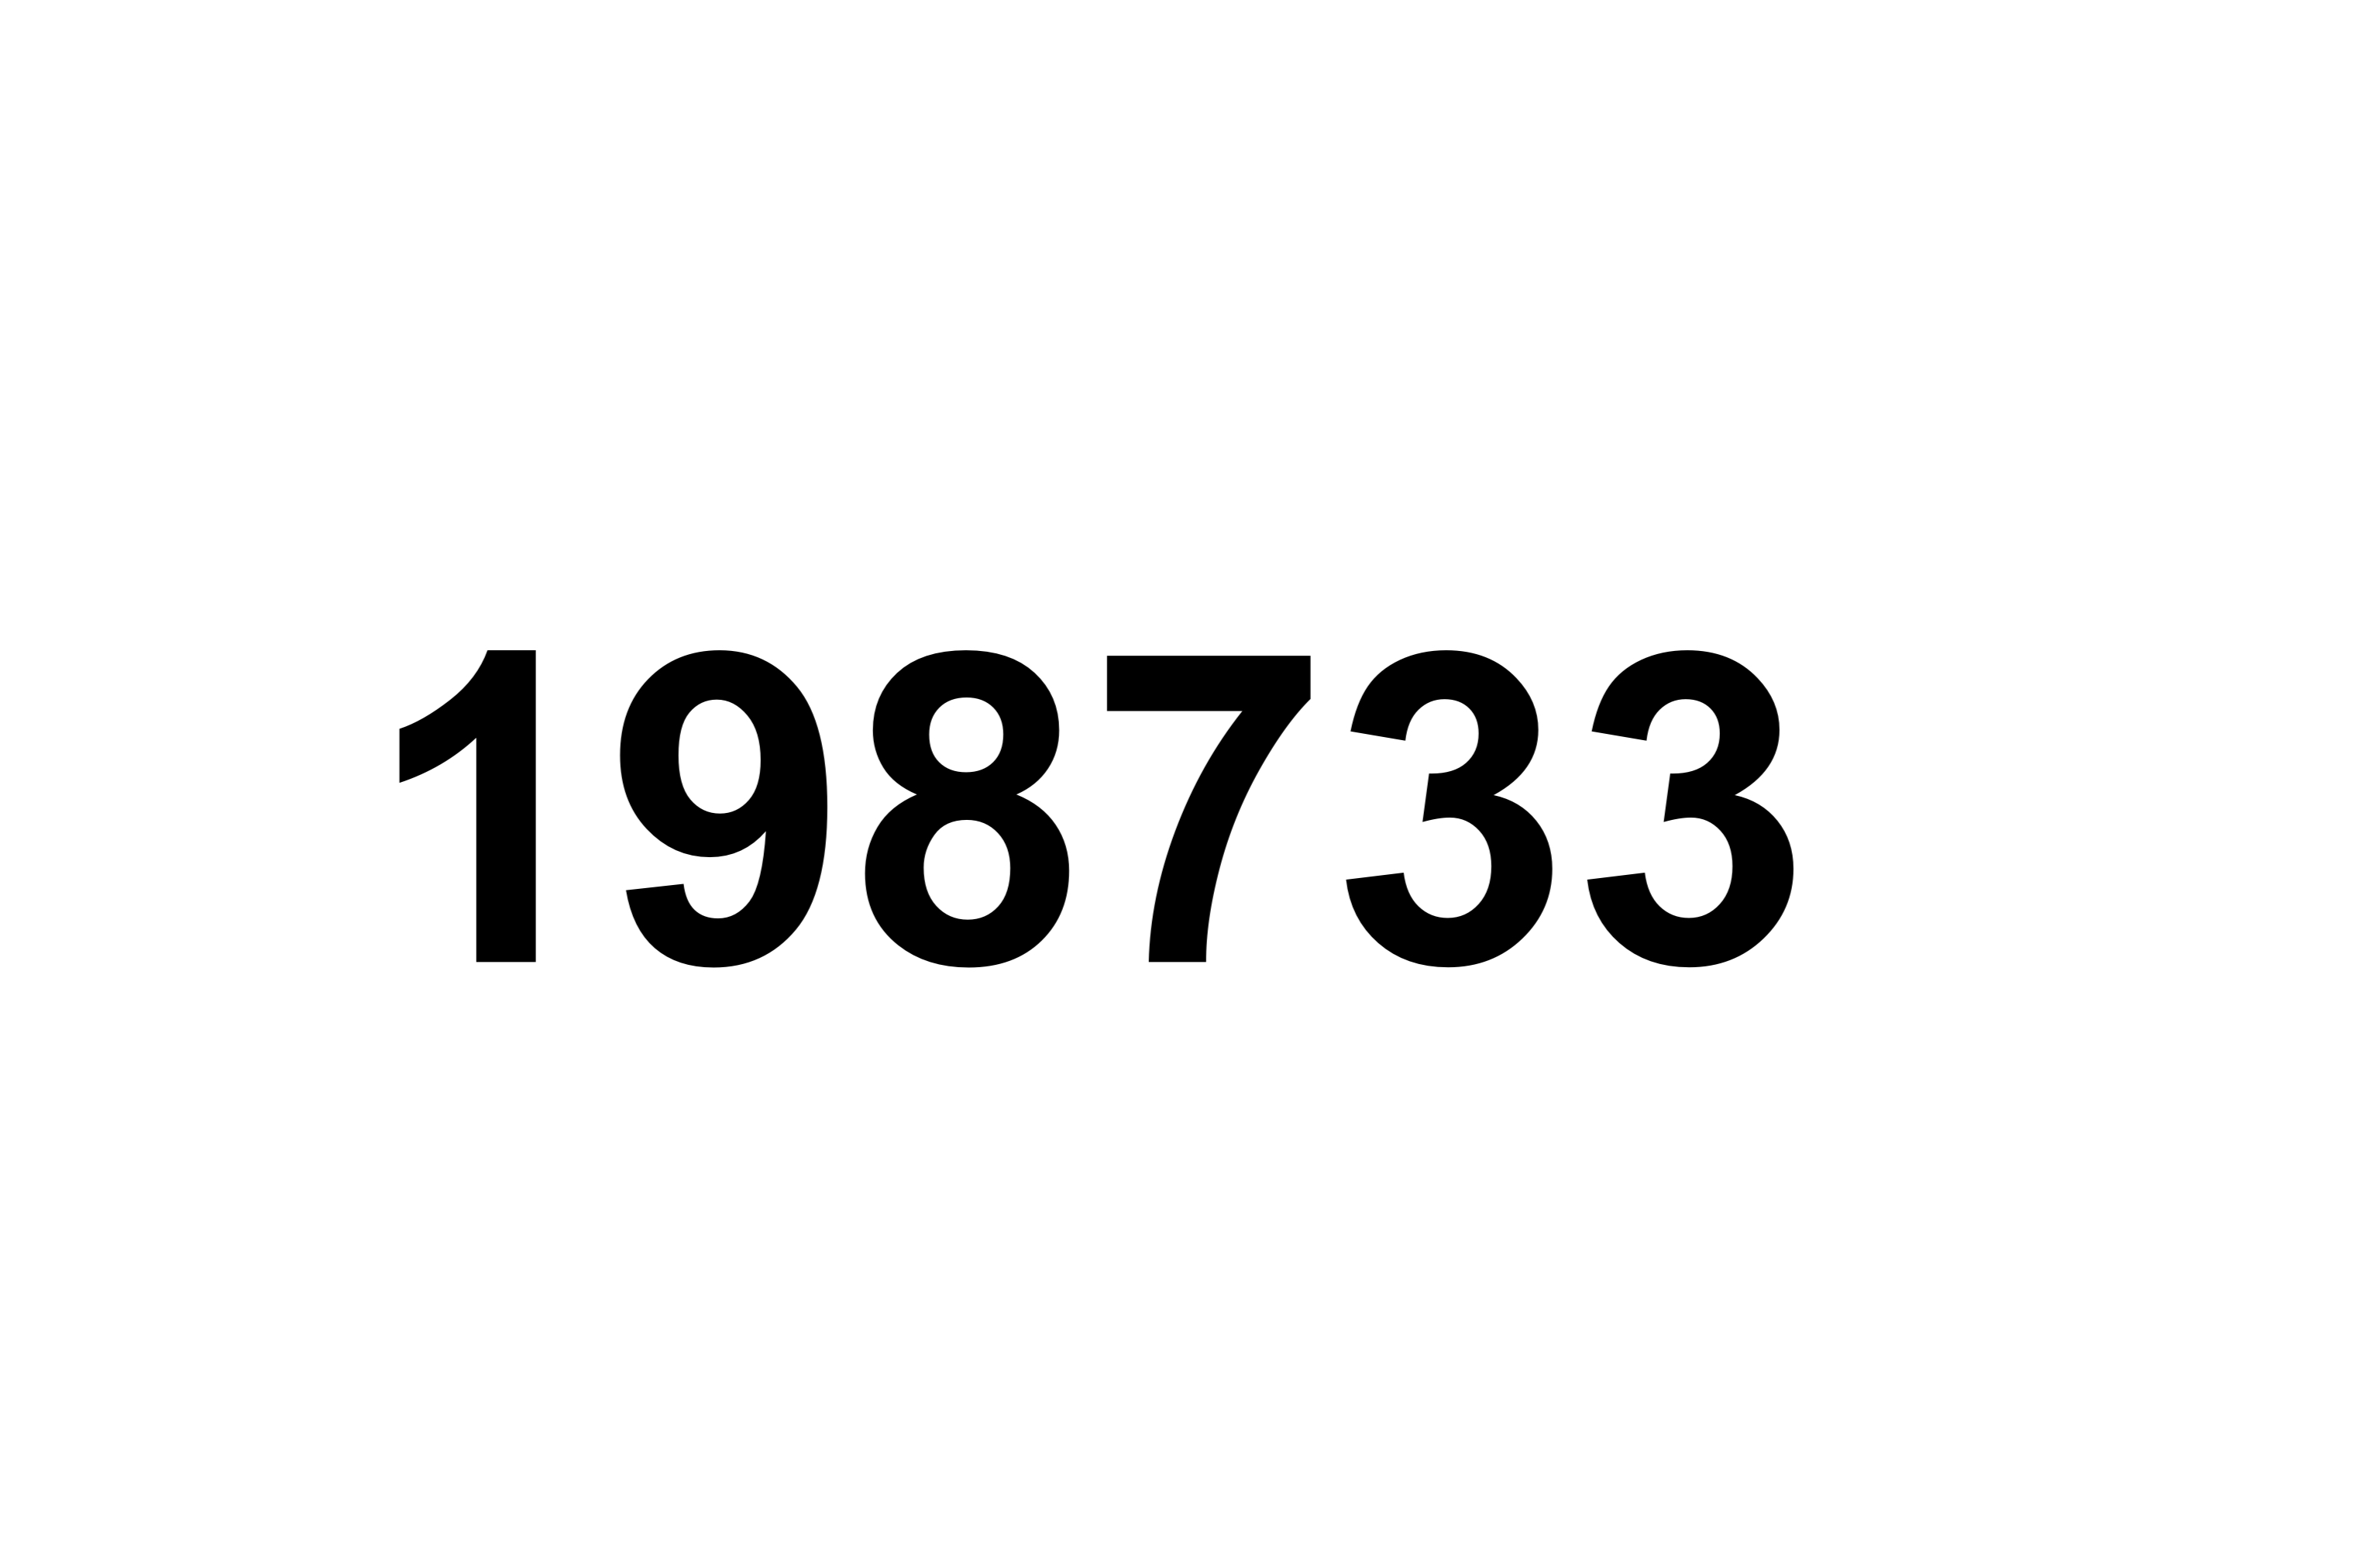 wikipedia list of prime numbers